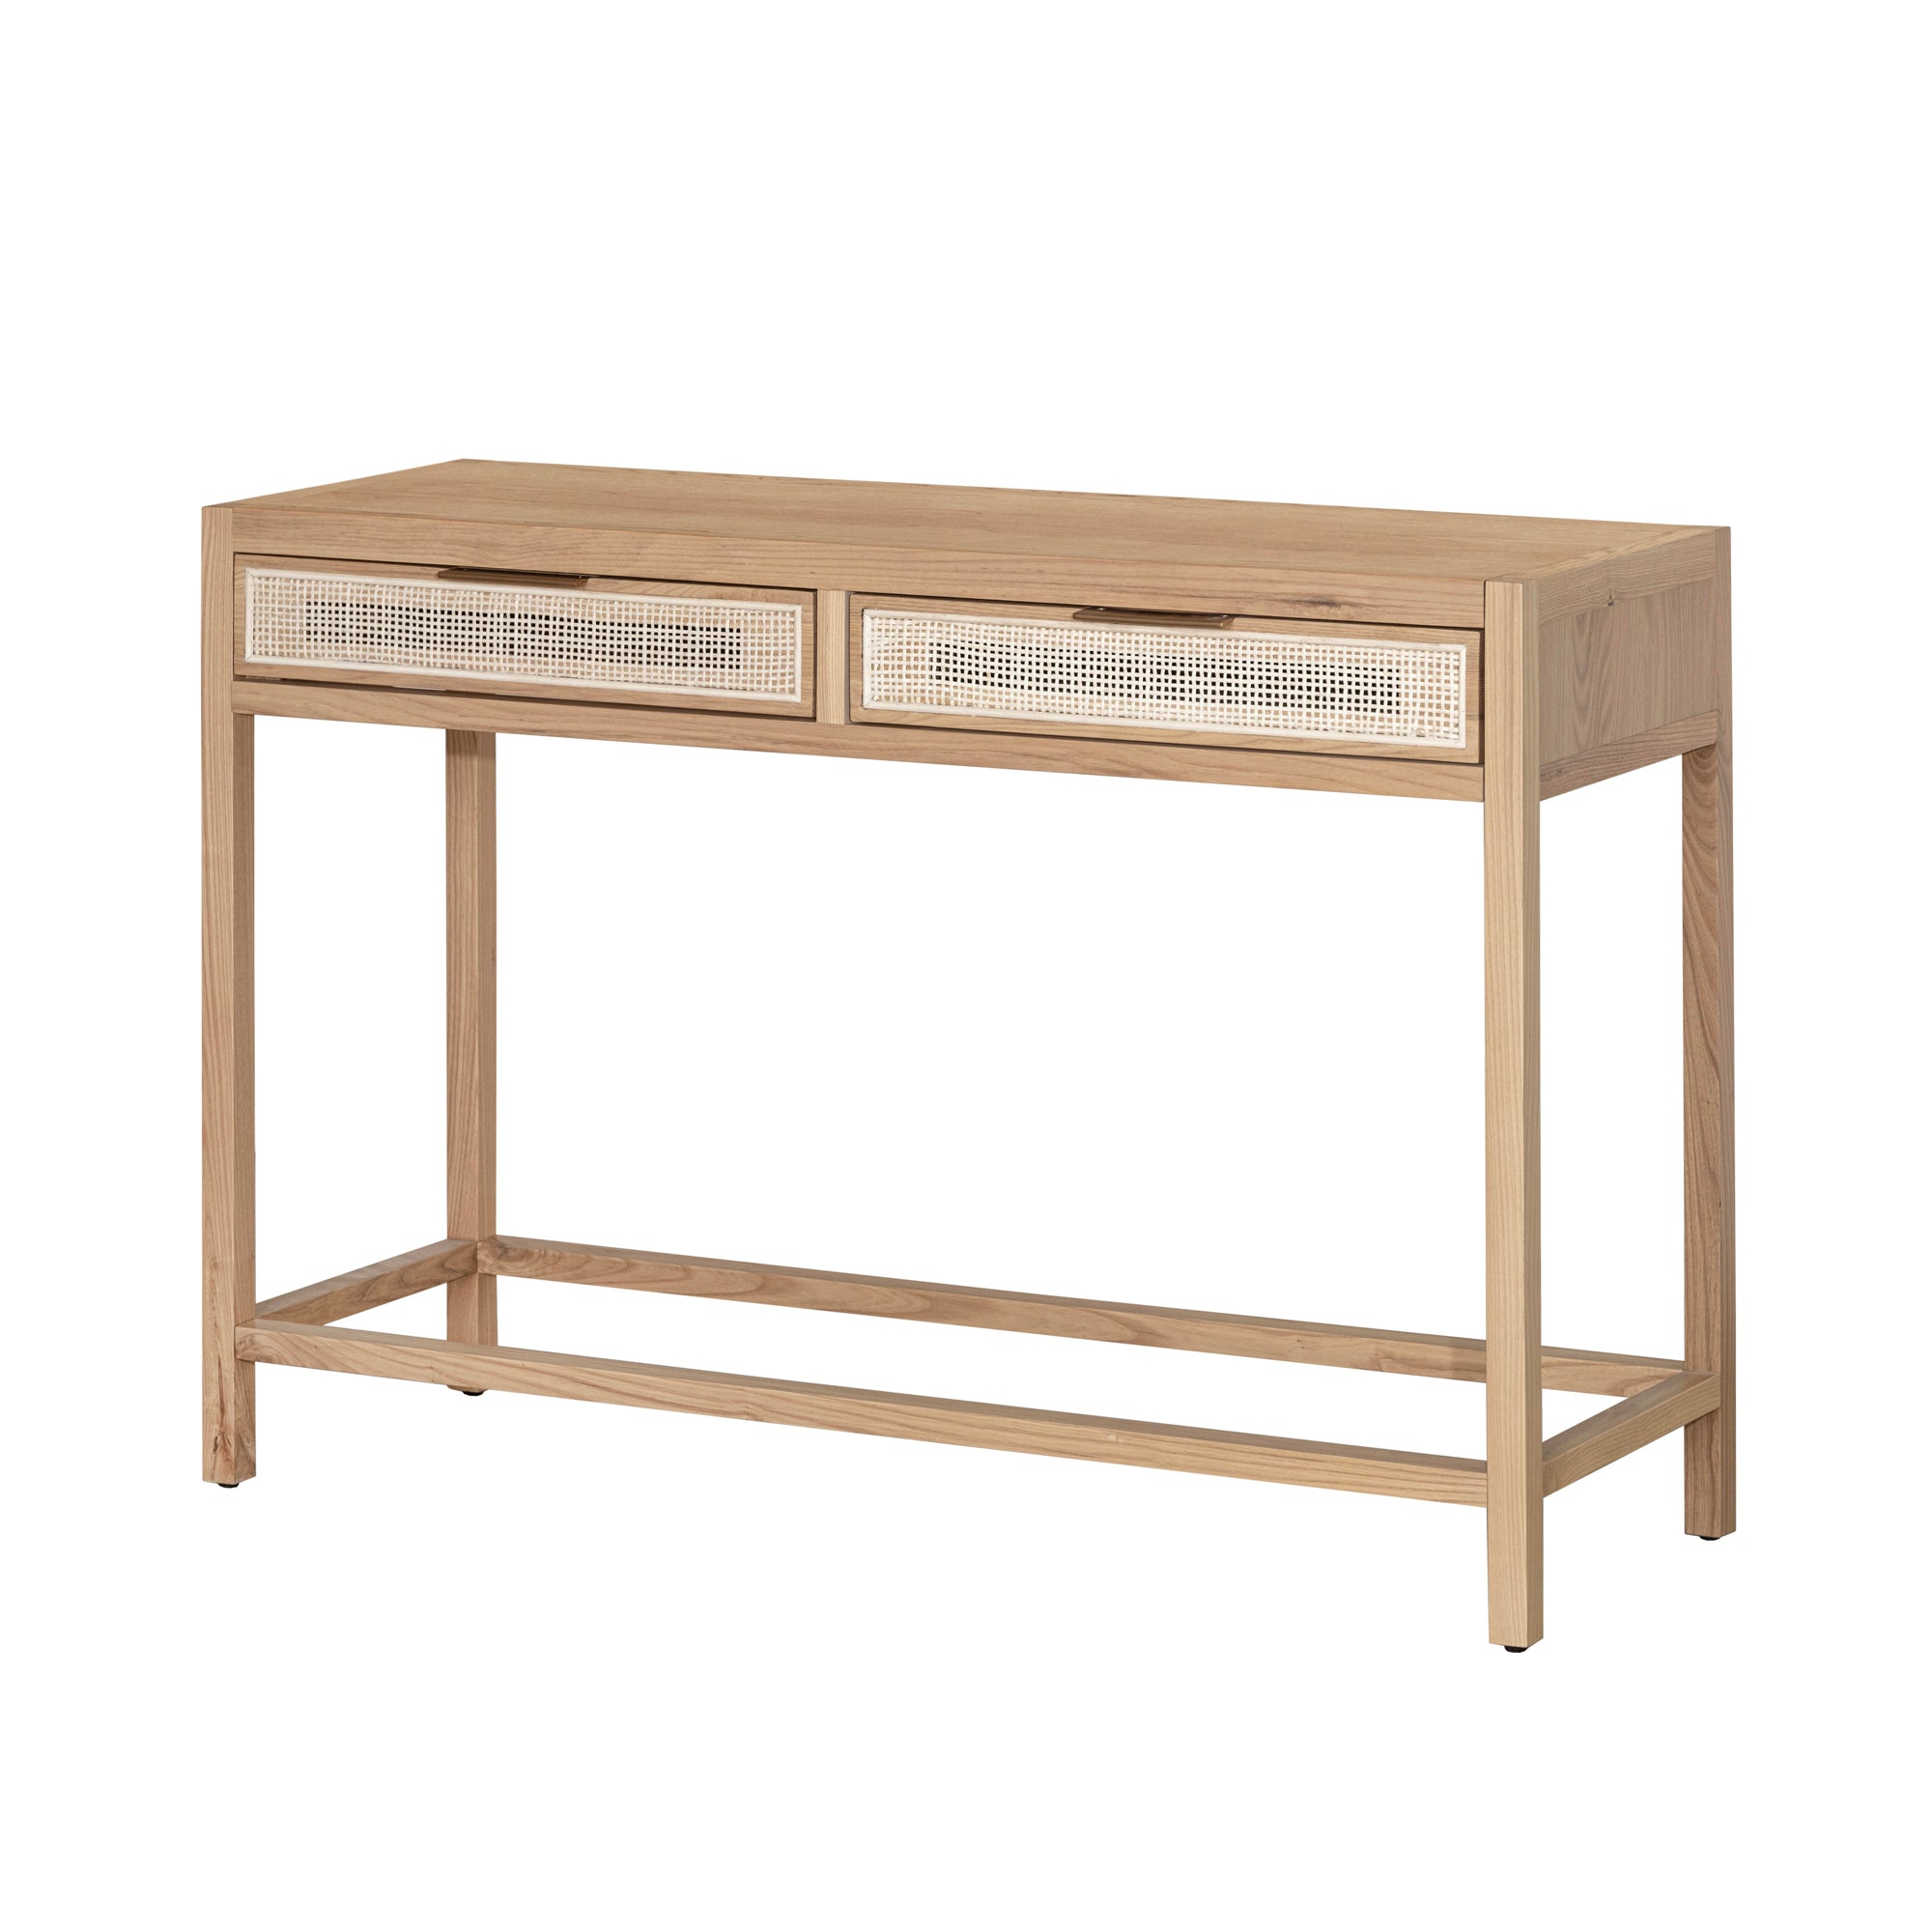 LH Imports, Rattana Console Table